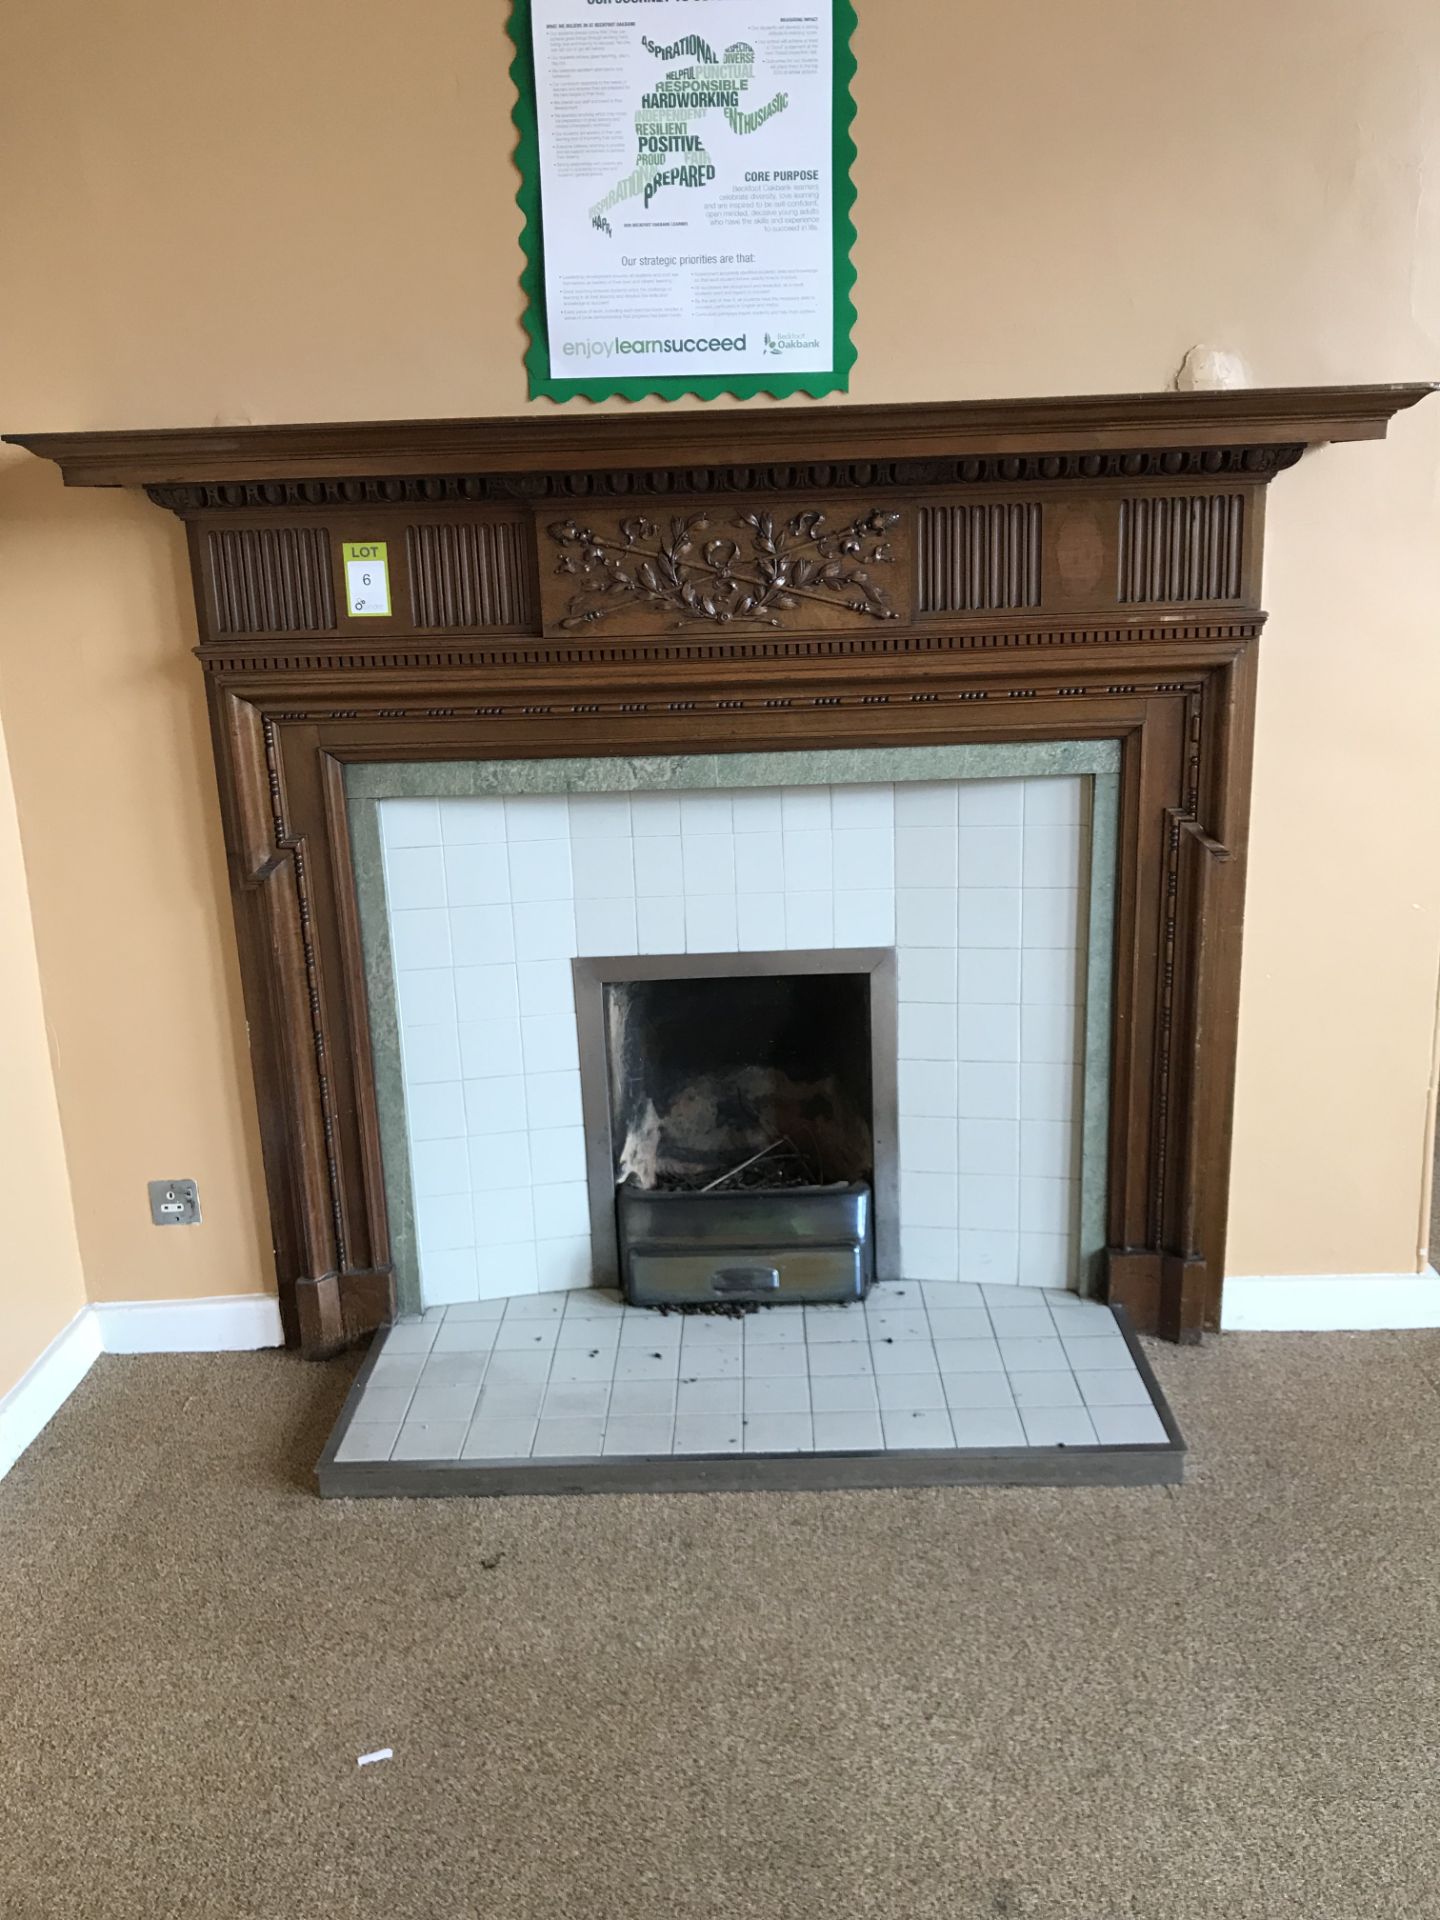 Period oak Fireplace with tile hearth and back (located in ground floor Meeting Room)